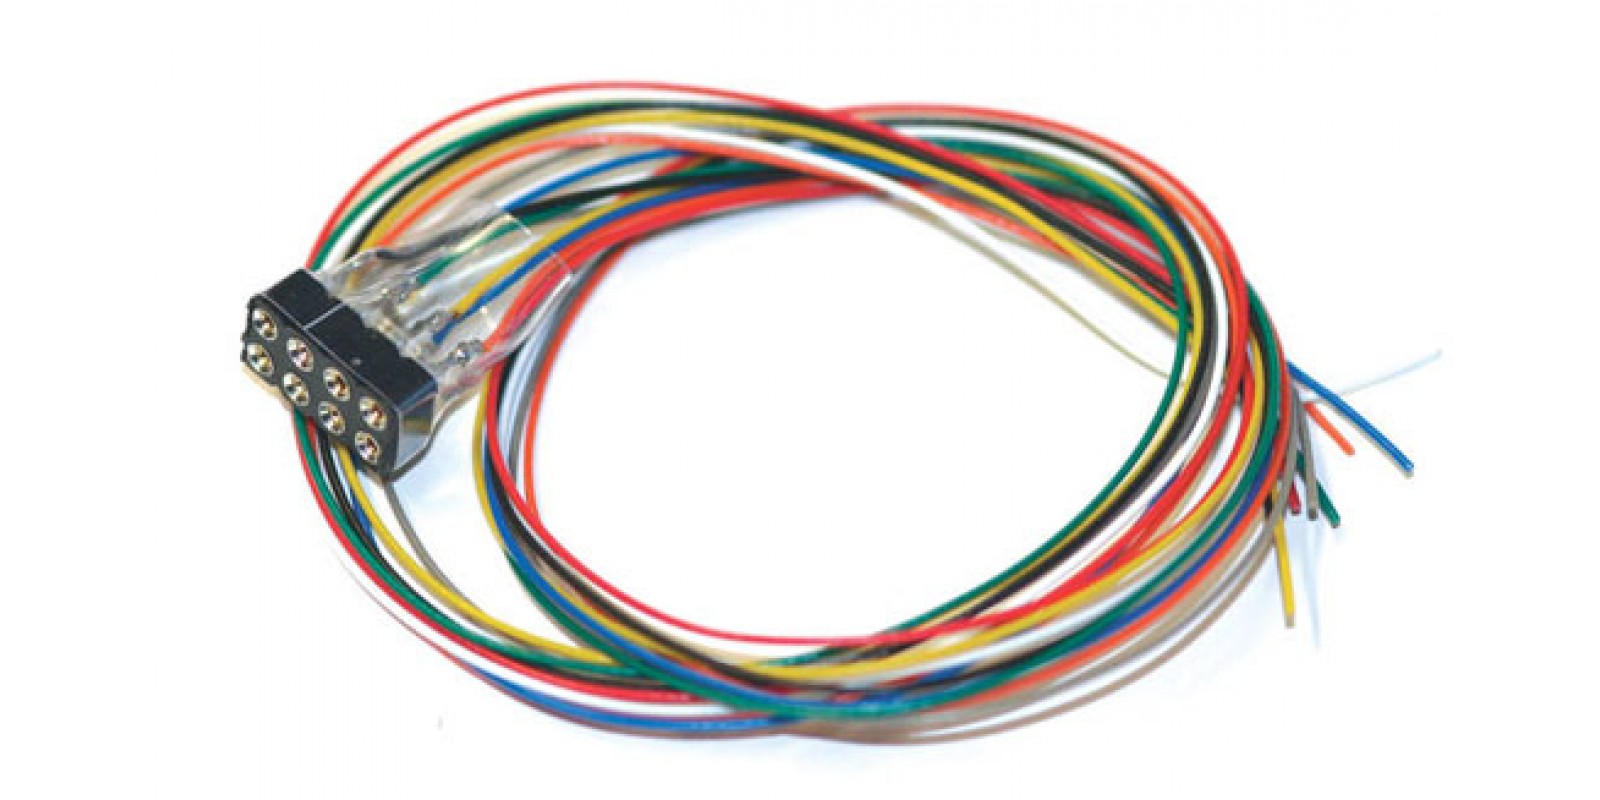 ES51950 Cable harness with 8-pin plug according to NEM 652, DCC colour, length 300mm